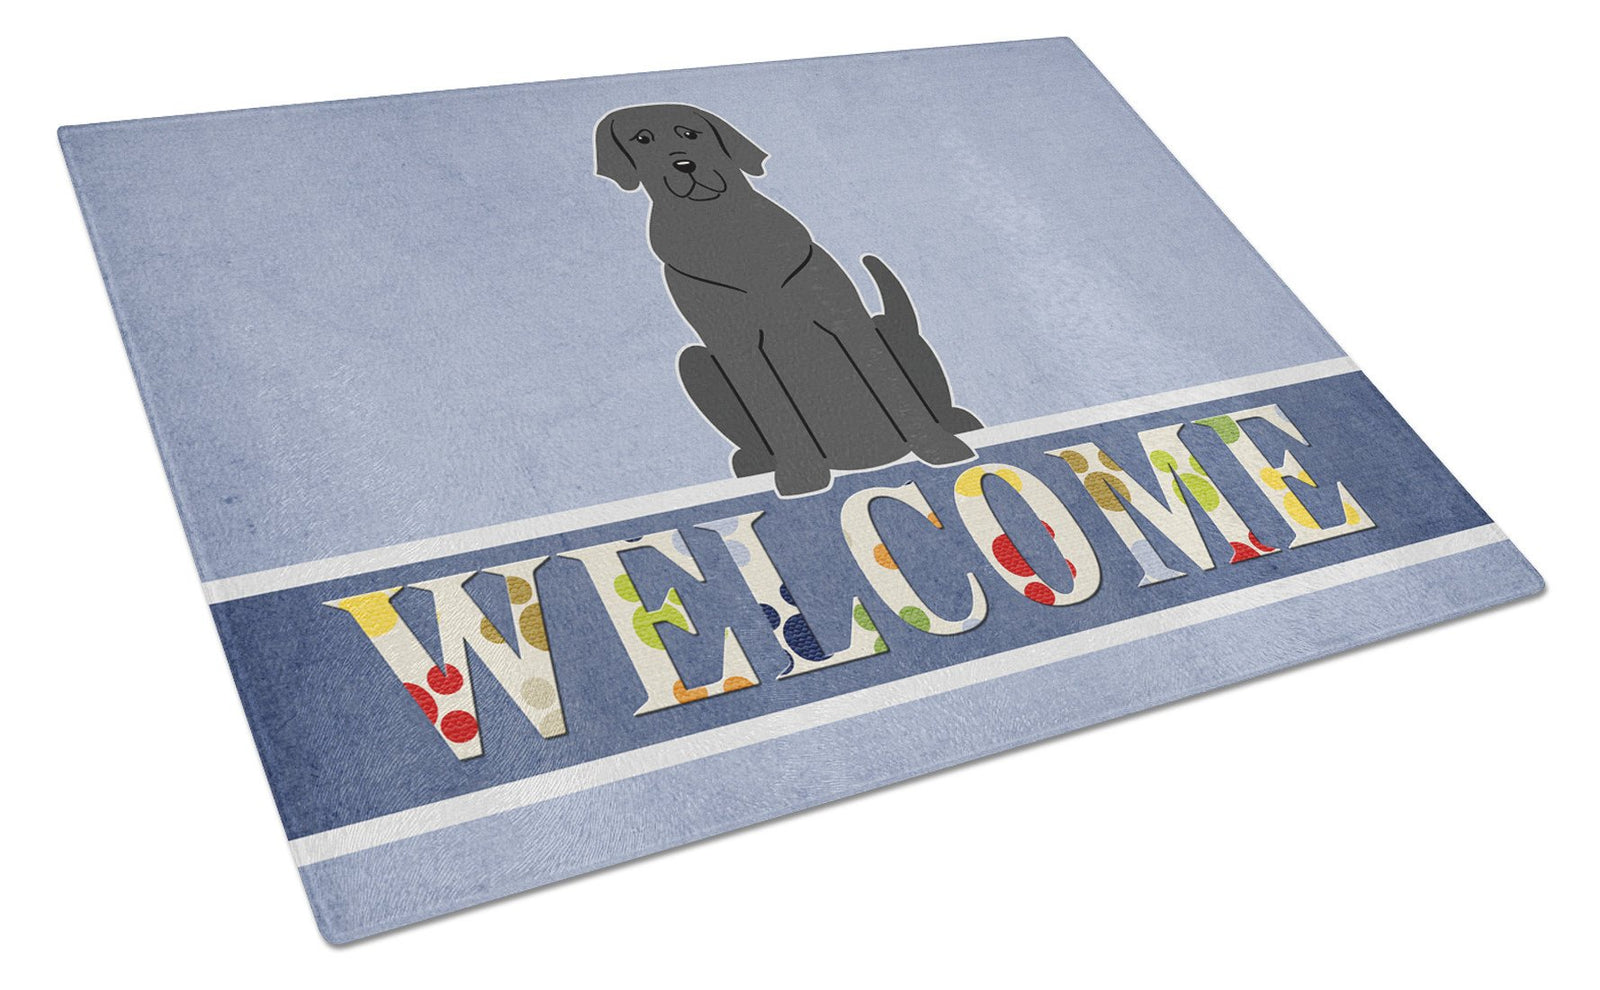 Black Labrador Welcome Glass Cutting Board Large BB5638LCB by Caroline's Treasures